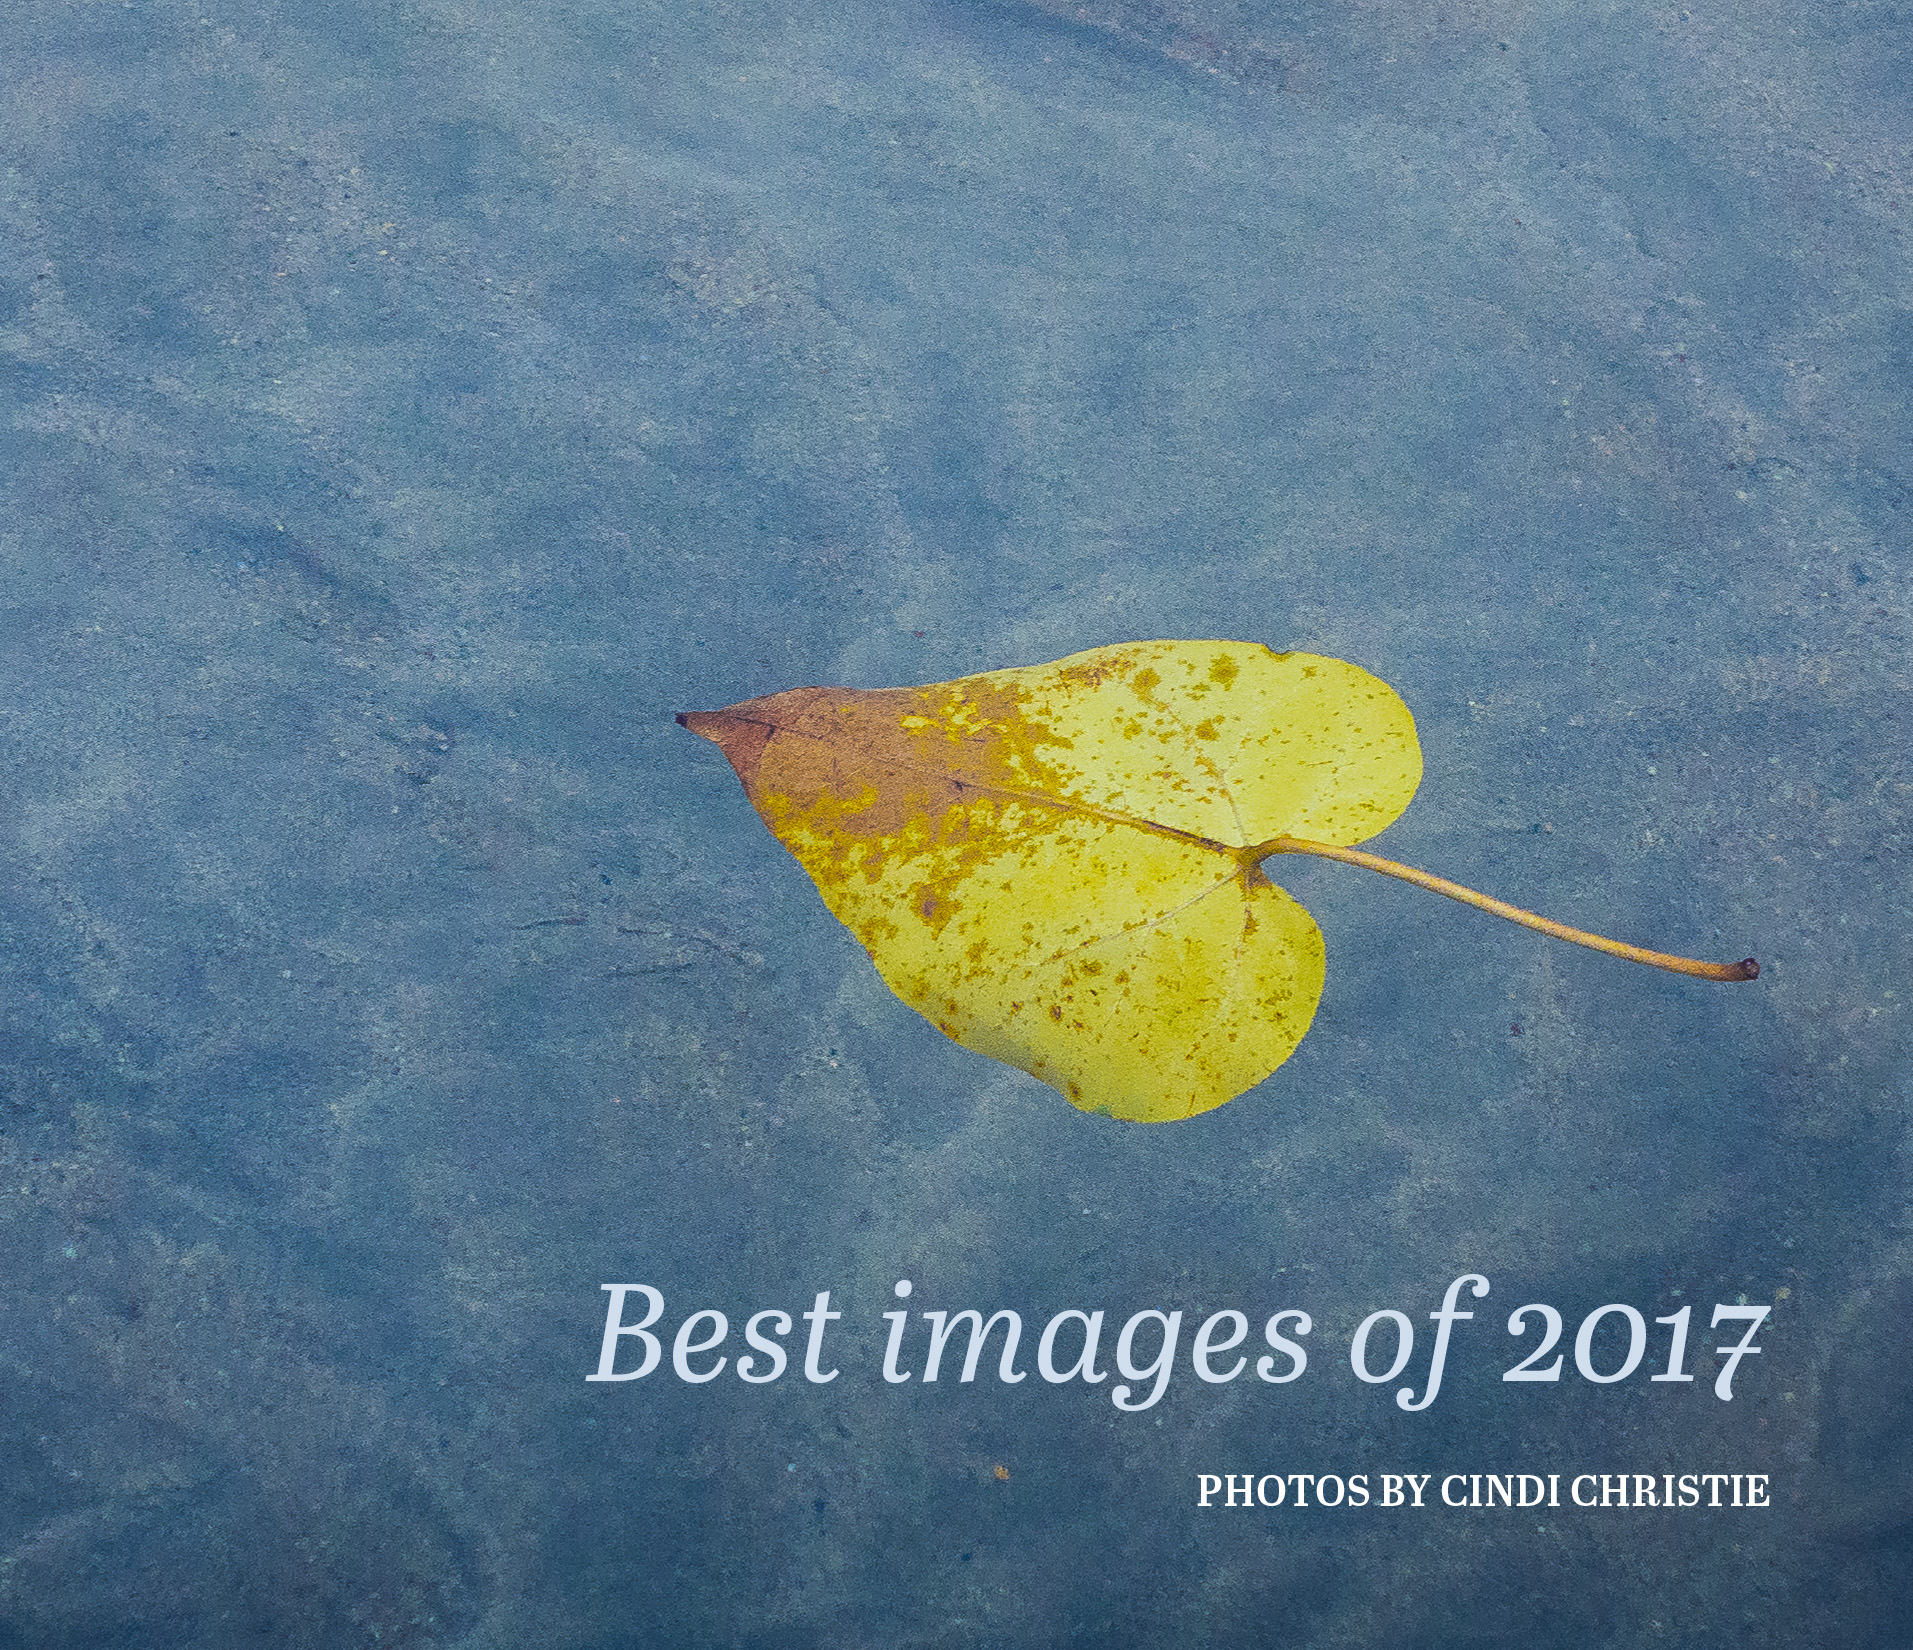 Click here to launch the Best Images of 2017 PDF